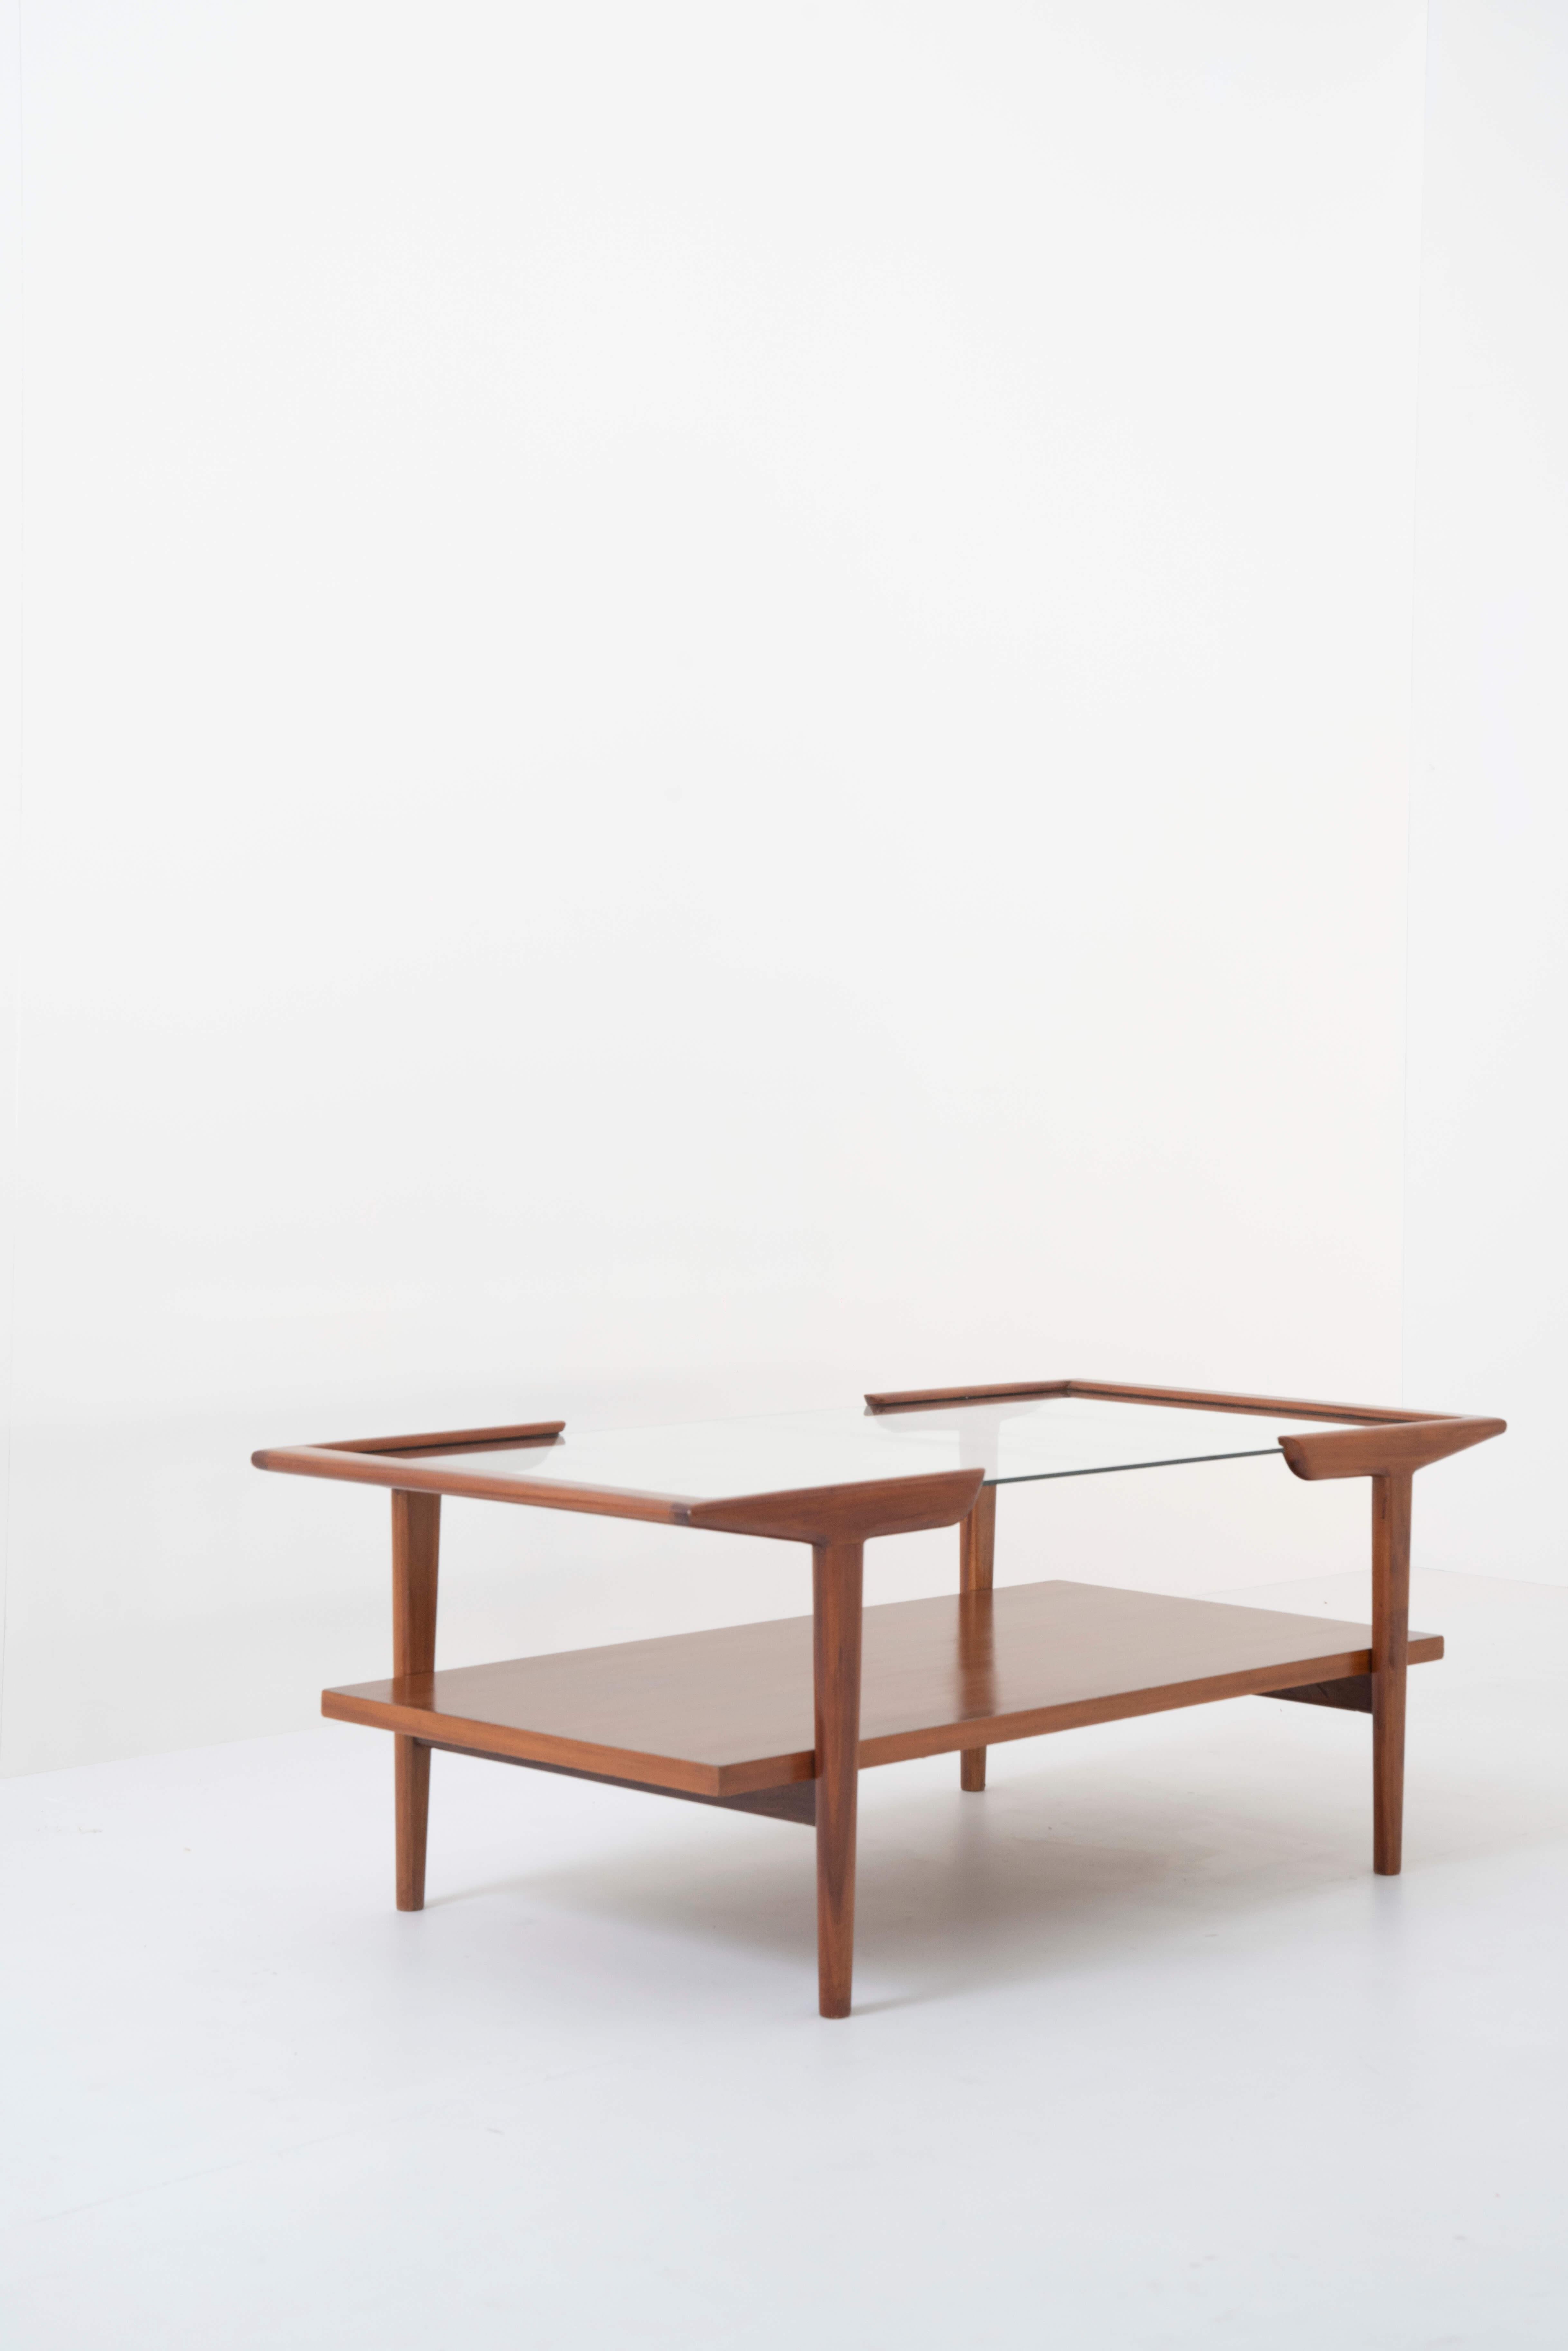 Brazilian Coffee Table in Wood and Glass Attr. to Martin Eisler, Brazil 1950s